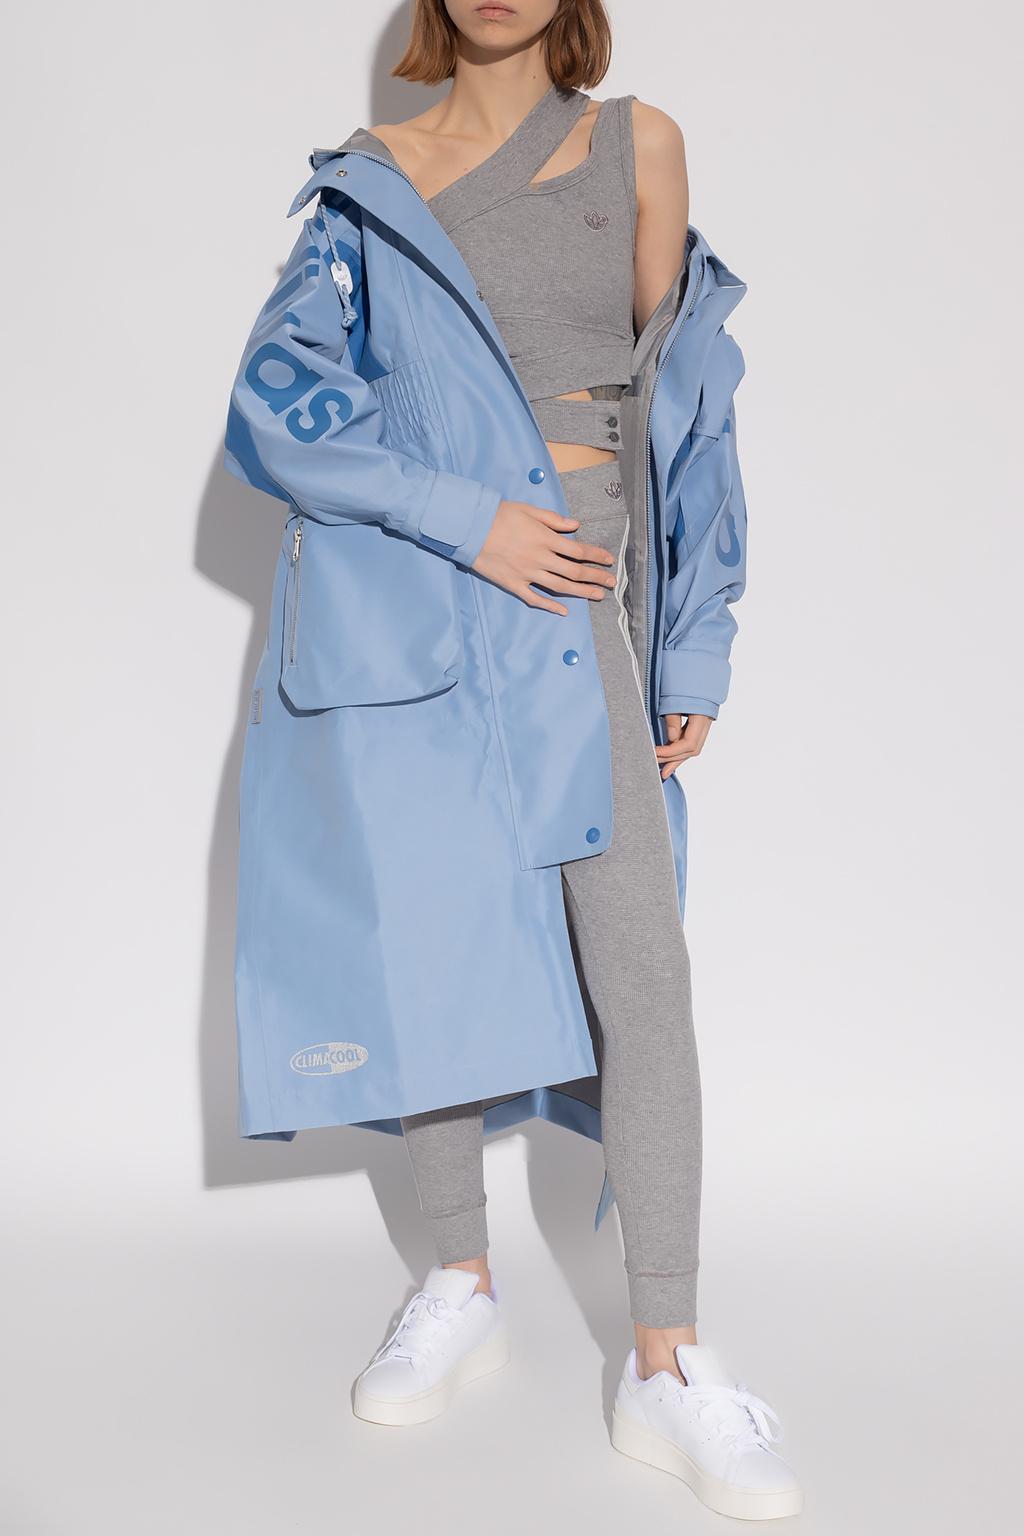 adidas Originals The 'blue Version' Collection Hooded Rain Coat | Lyst